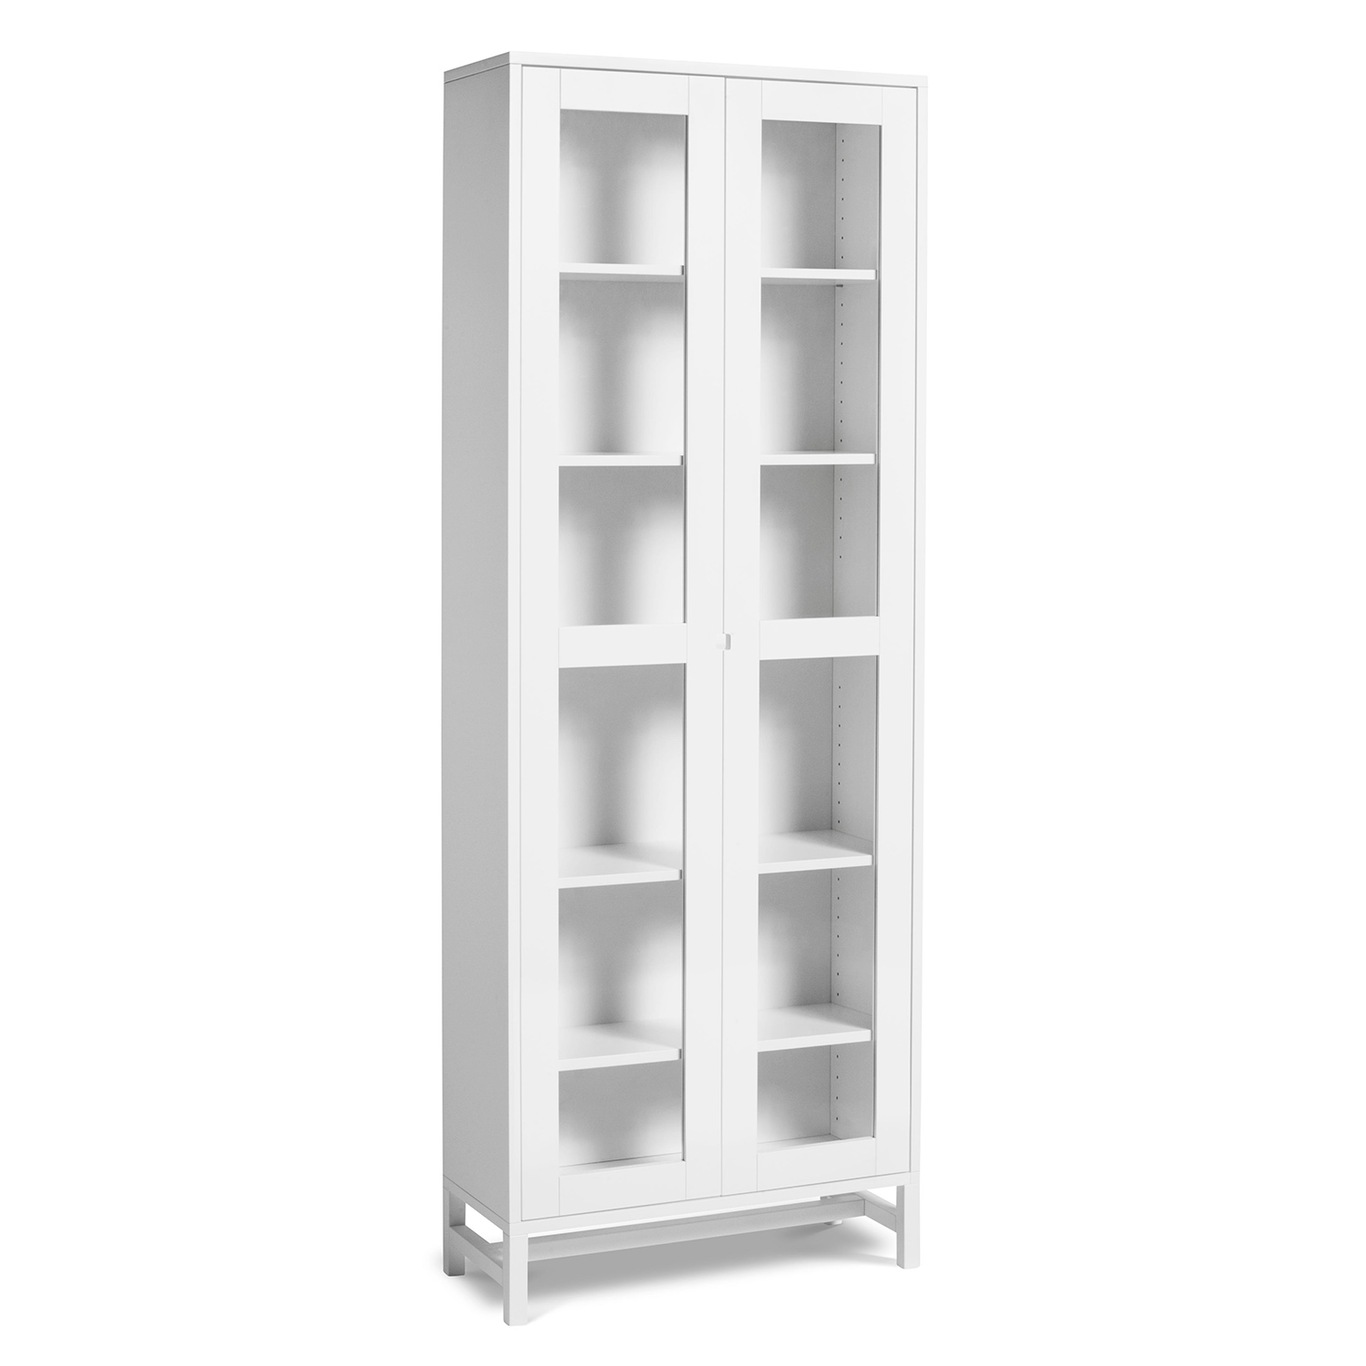 Falsterbo Cabinet 190 cm Glass Doors, White